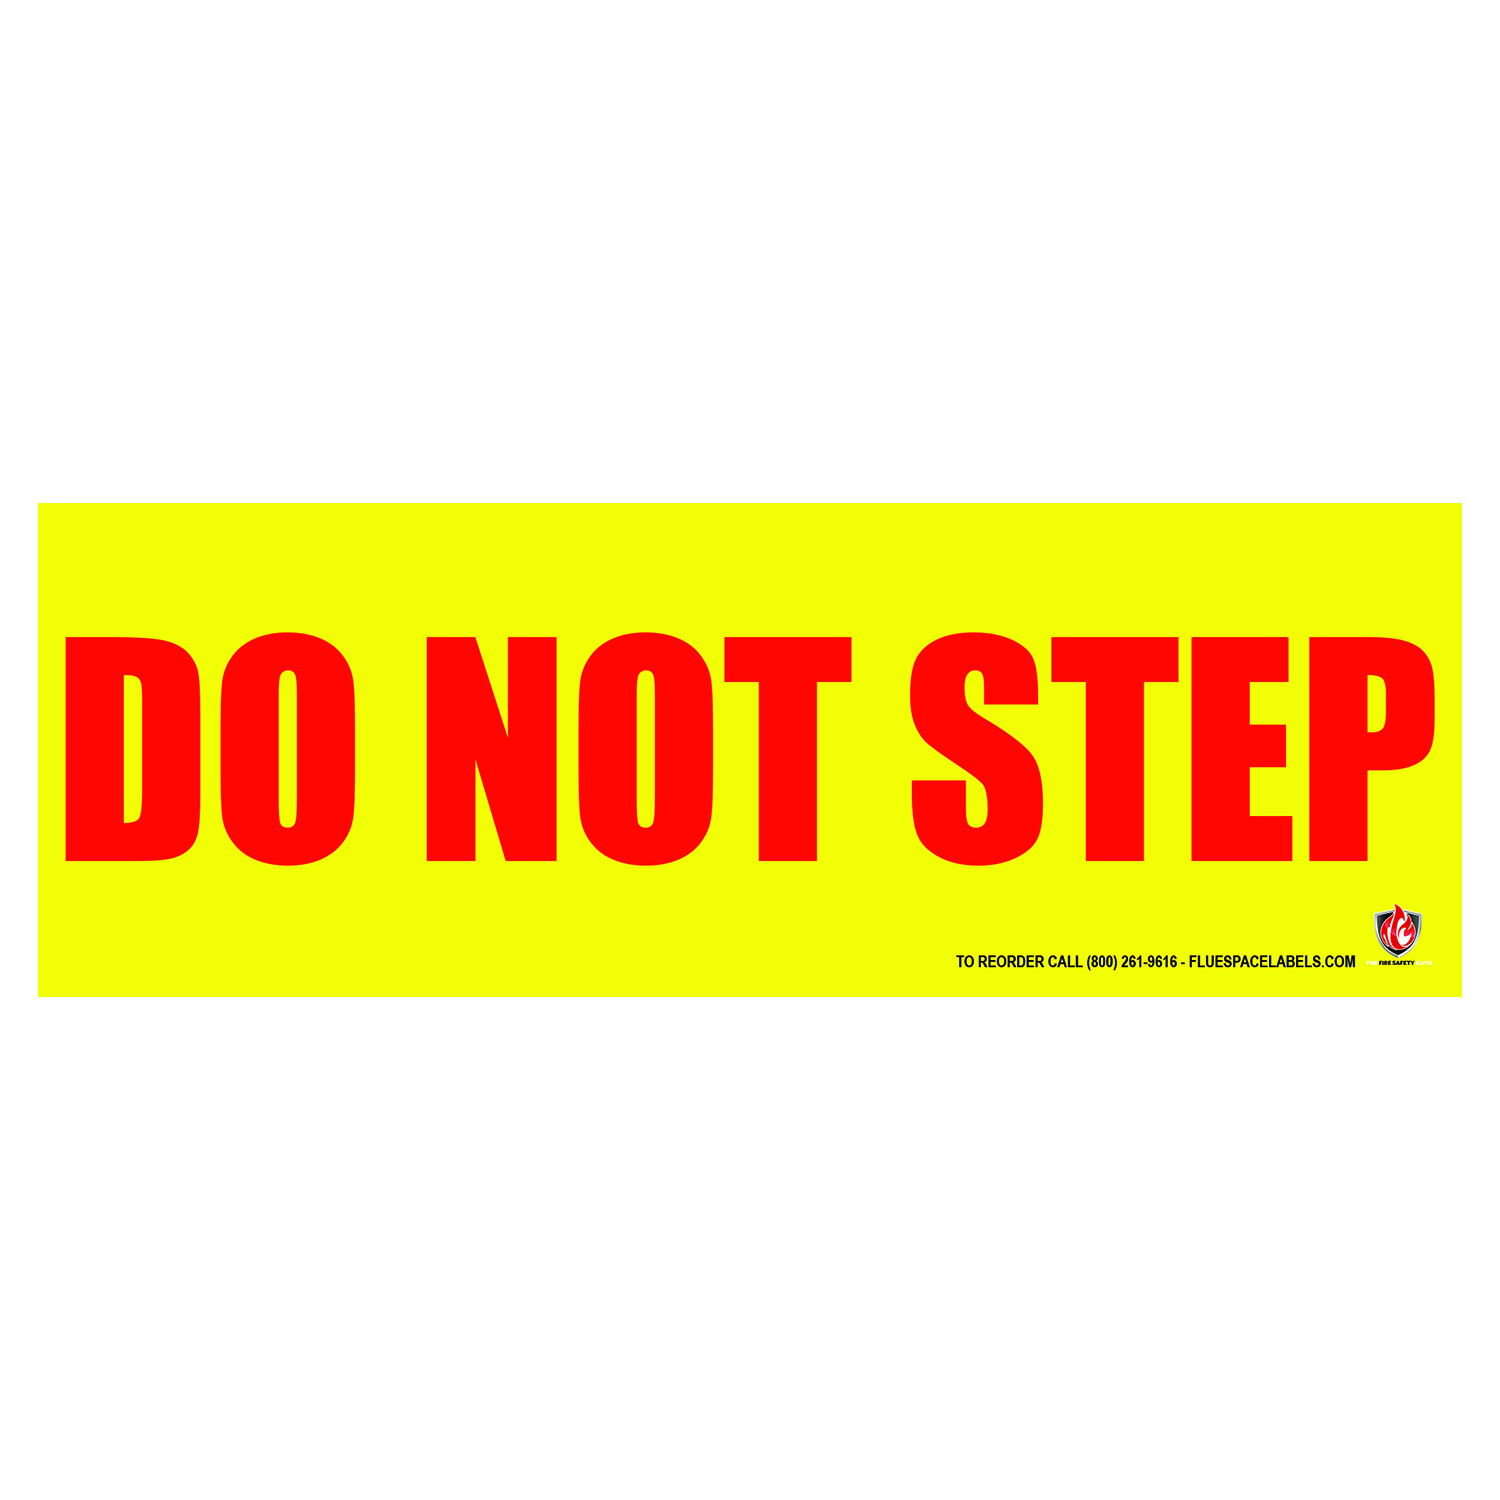 DO NOT STEP YELLOW BG LABELS